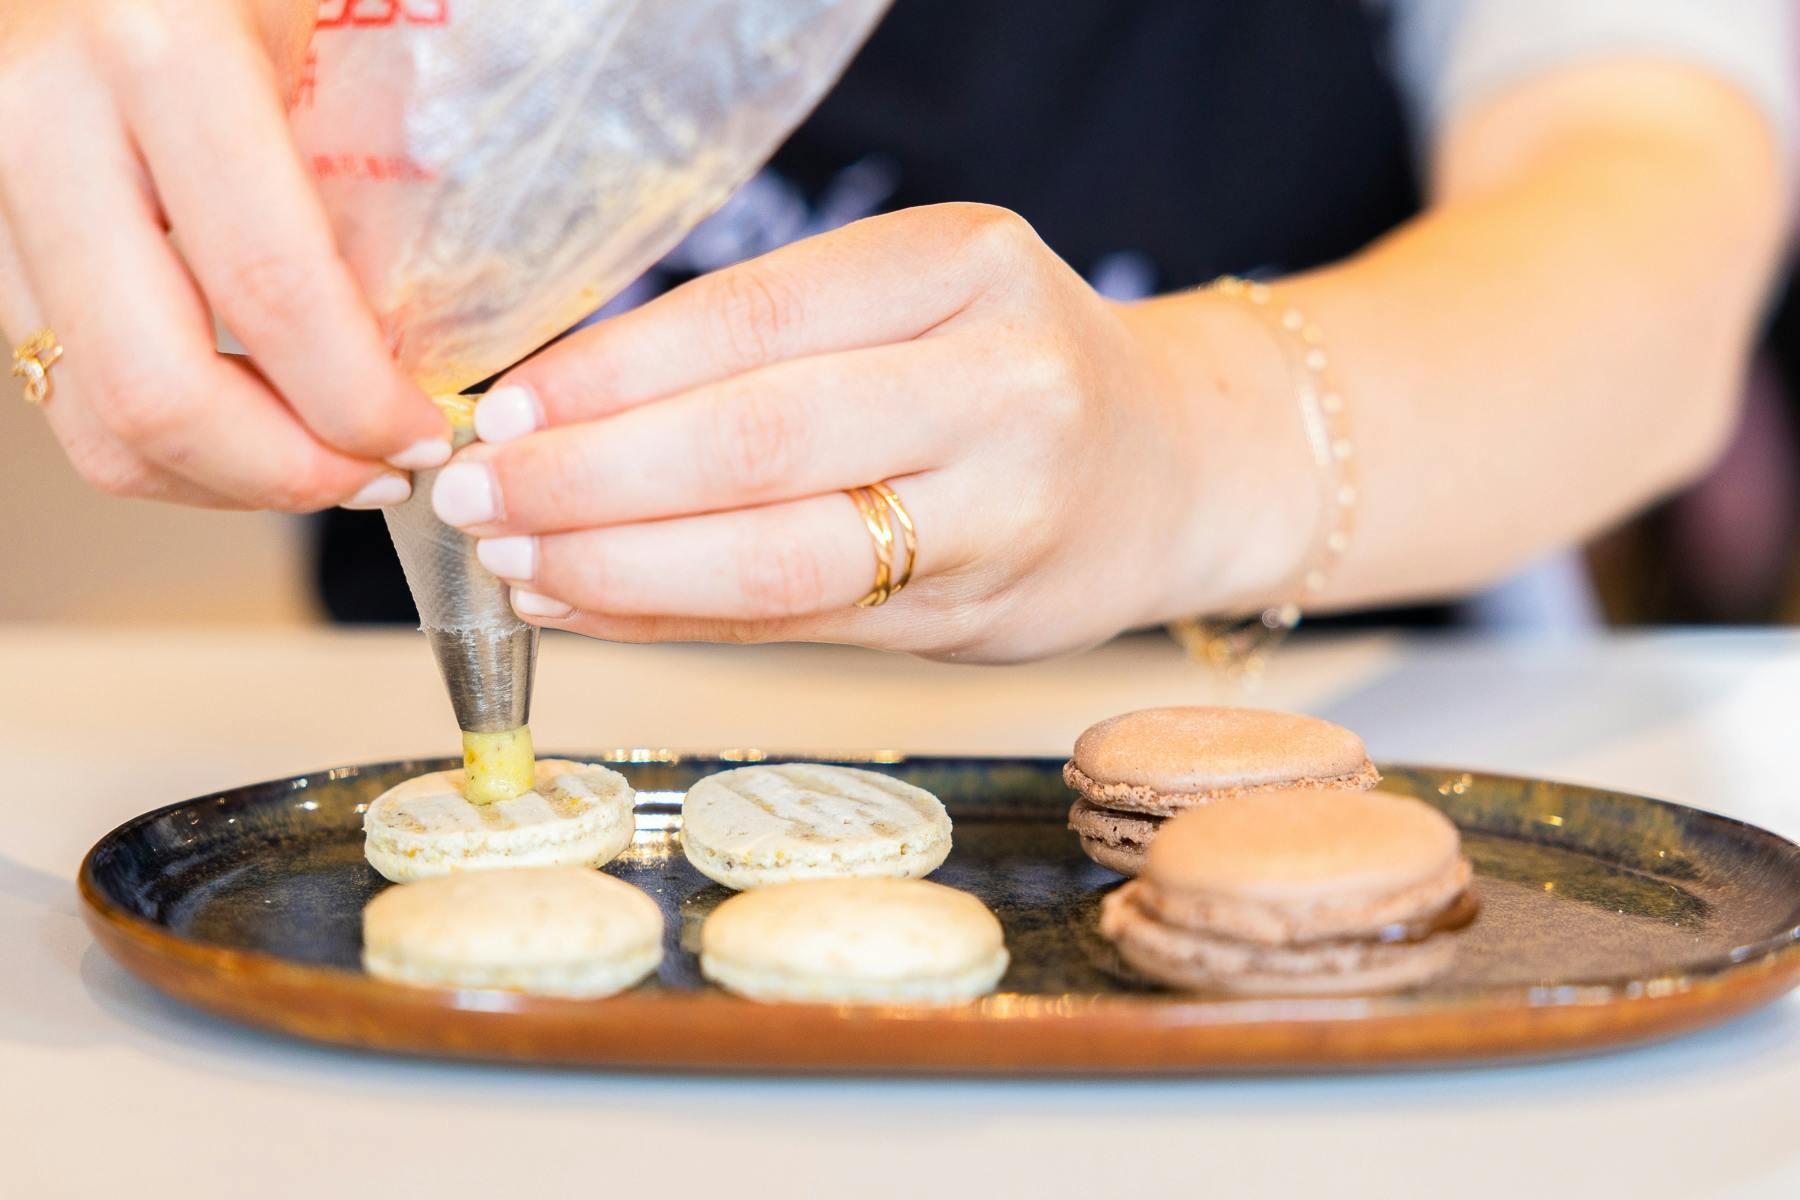 French macaron baking class at Galeries Lafayette